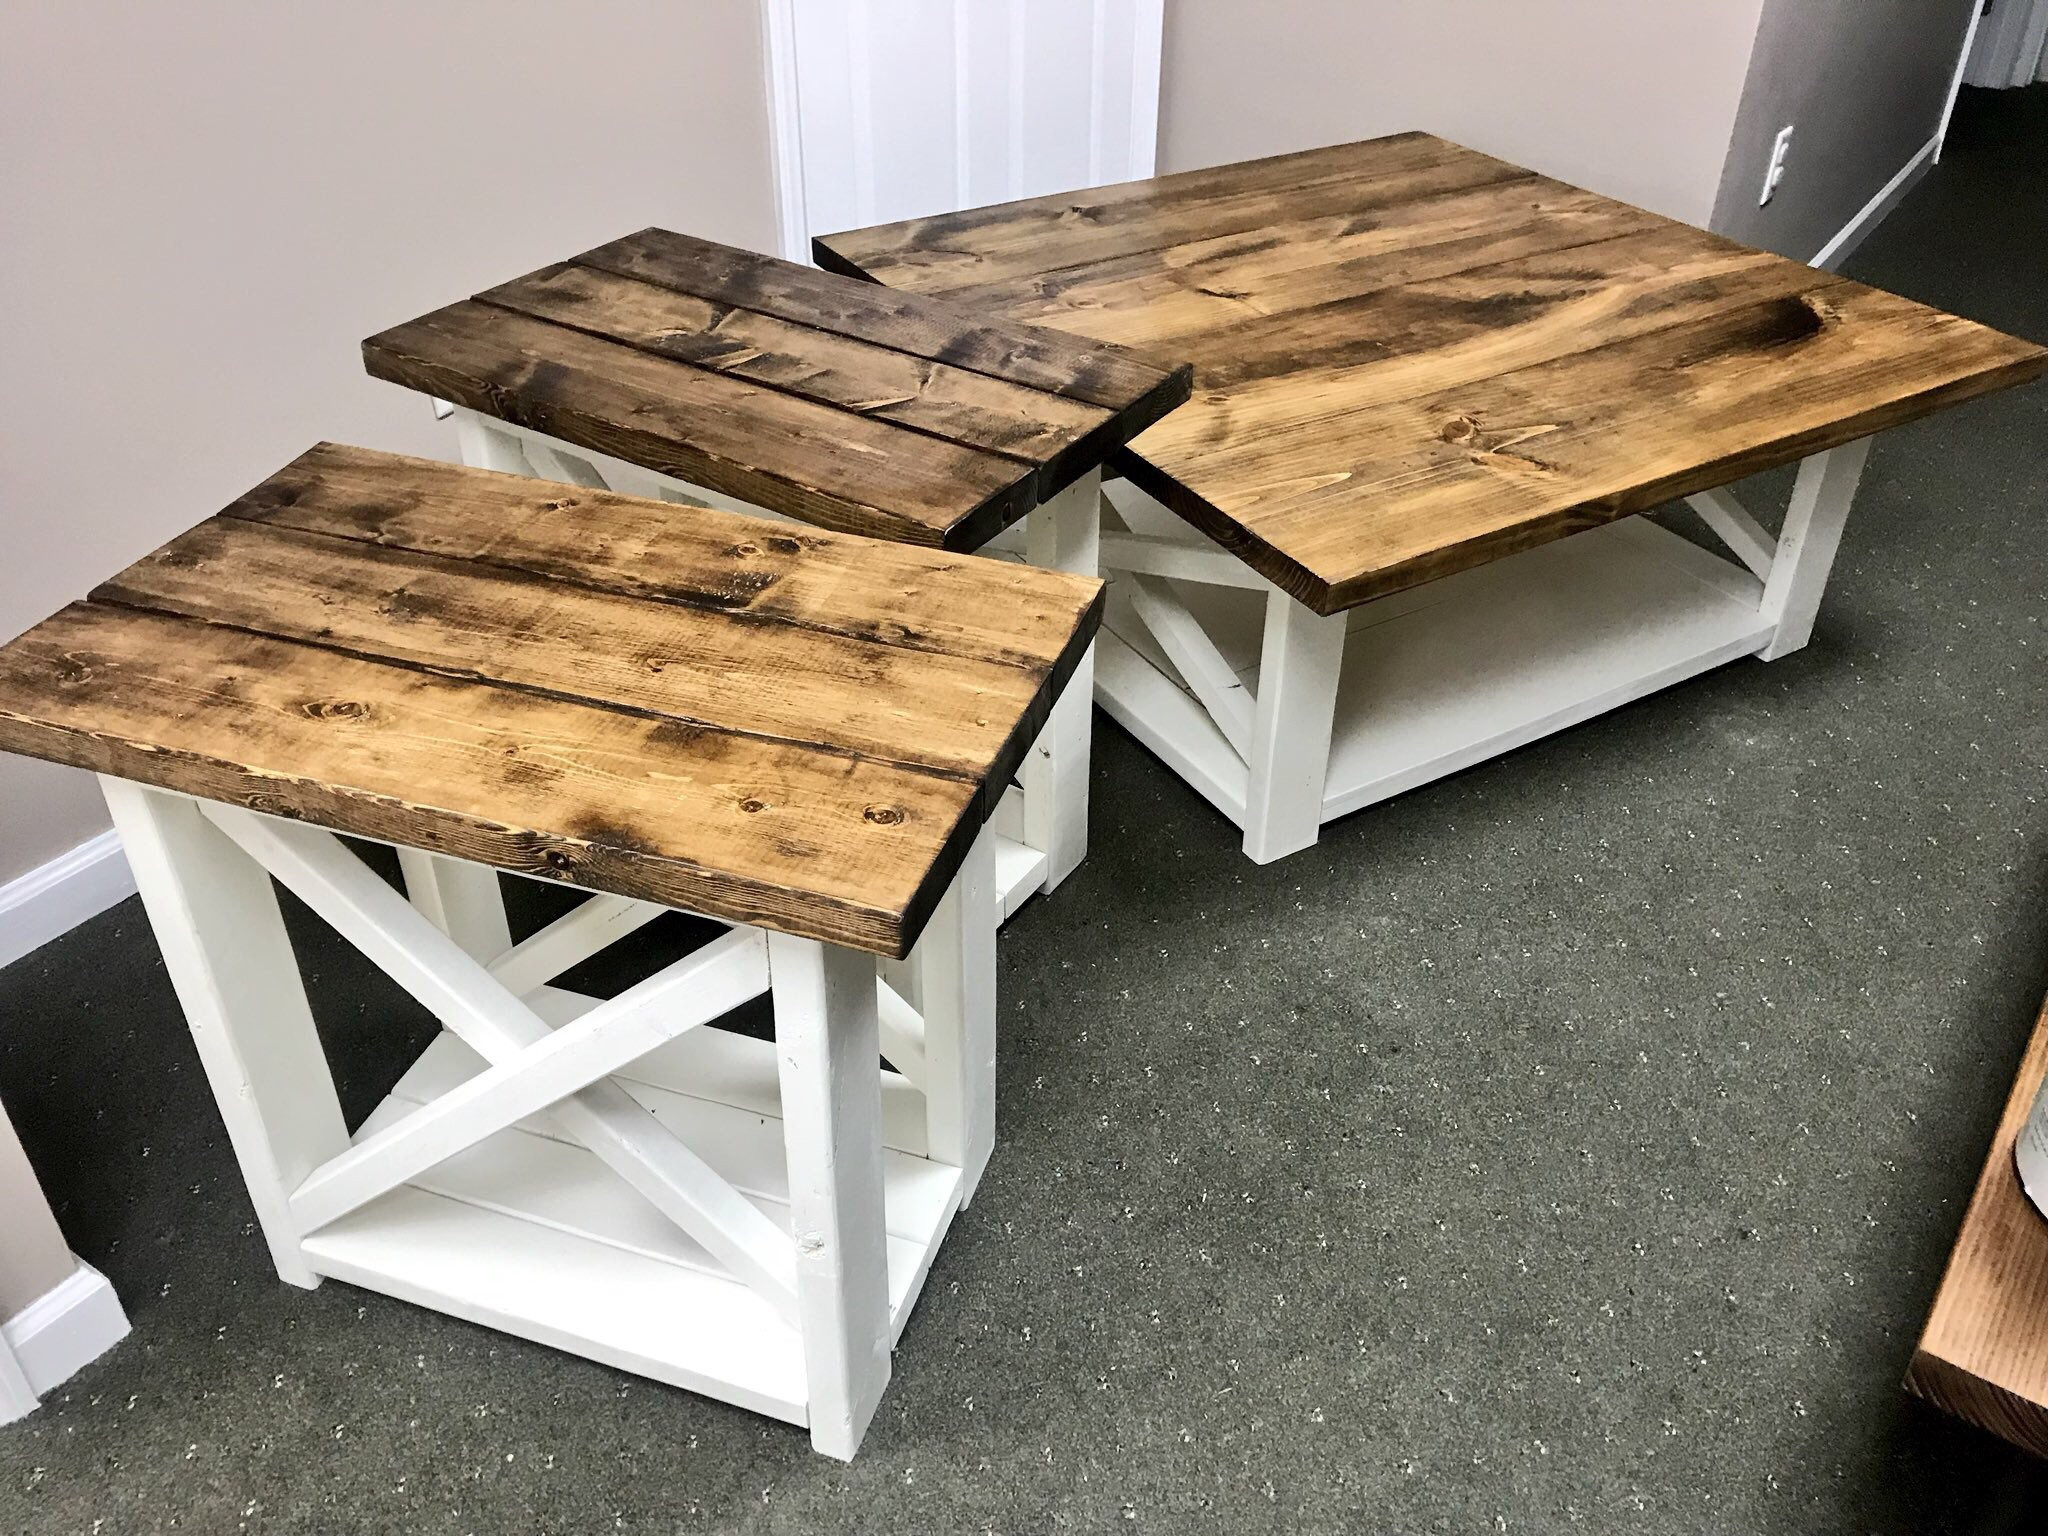 Rustic Living Room Table Sets
 Rustic Living Room Set Farmhouse Coffee Table With